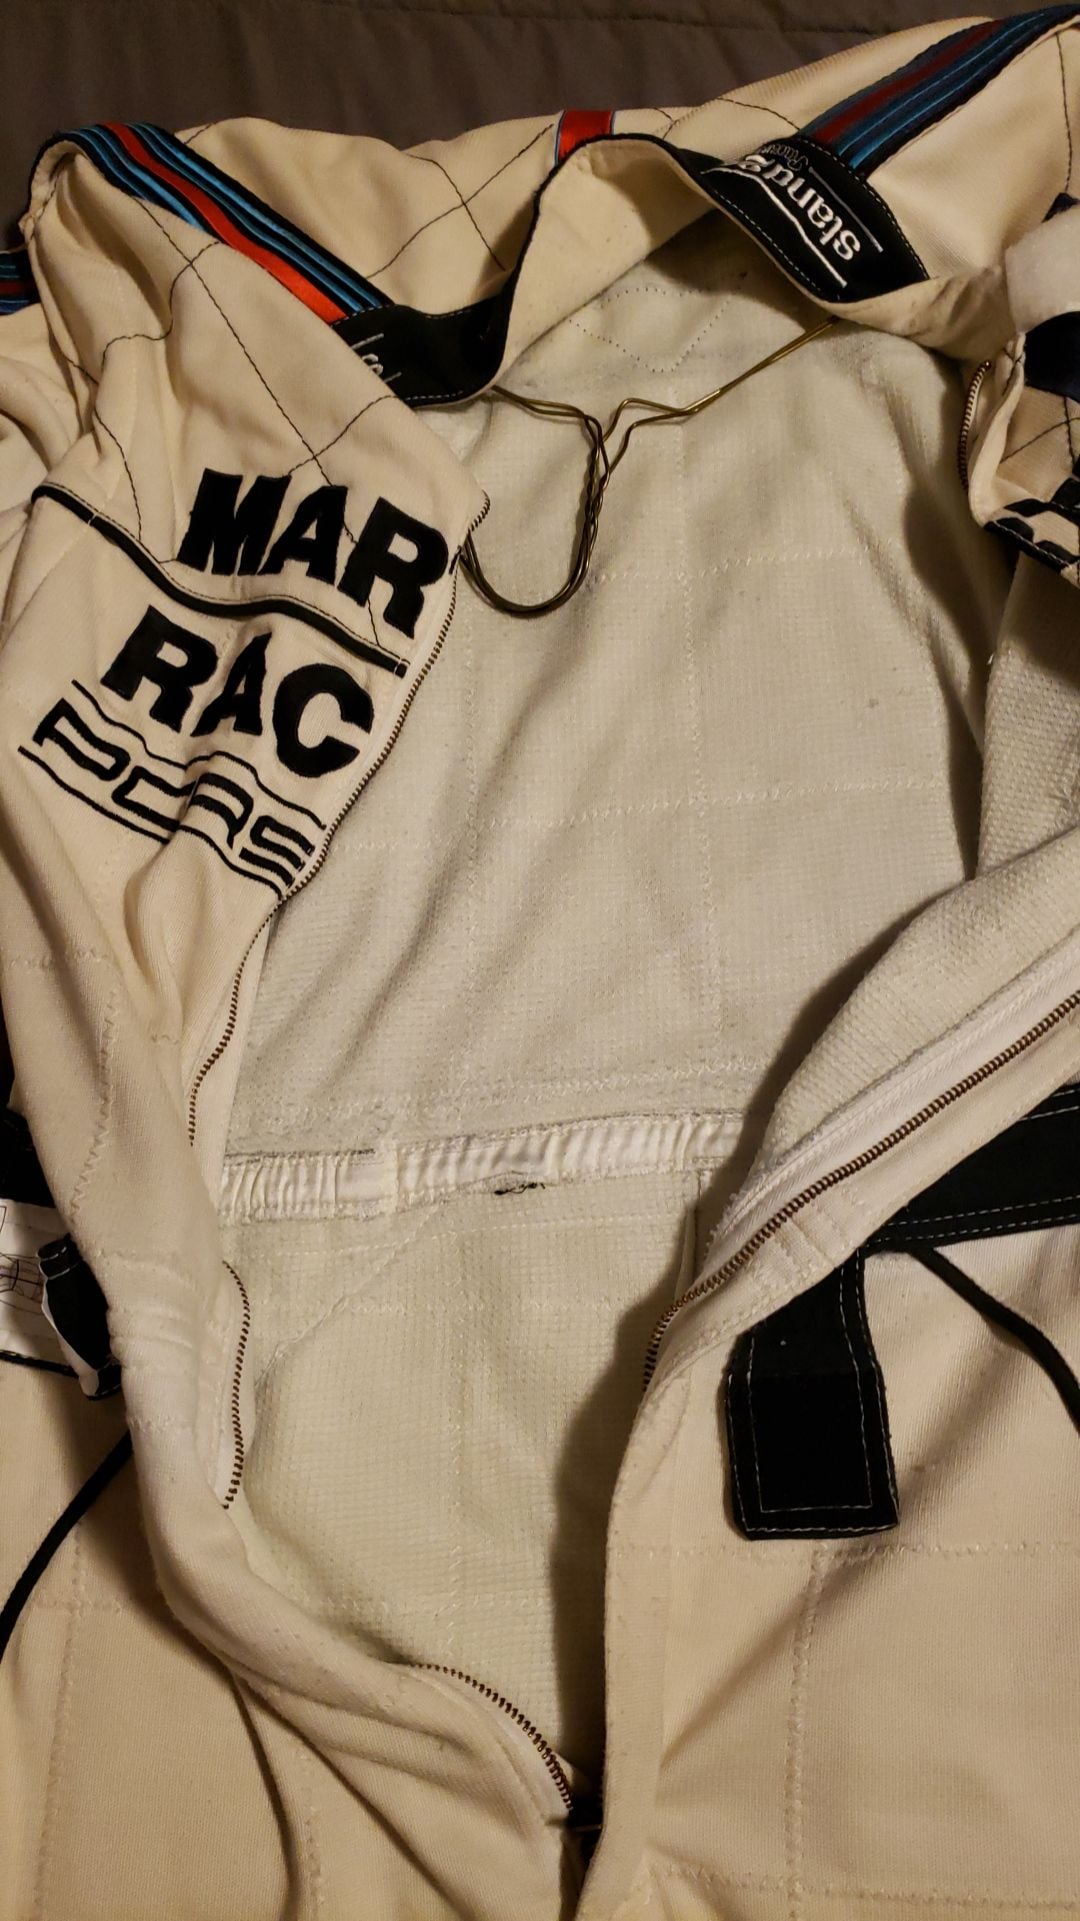 Miscellaneous - STAND21 Porsche Race Suit Driven Motorsports gloves and SPARCO SHIELD RW-9 balaclavas - Used - All Years Any Make All Models - Atlanta, GA 30339, United States